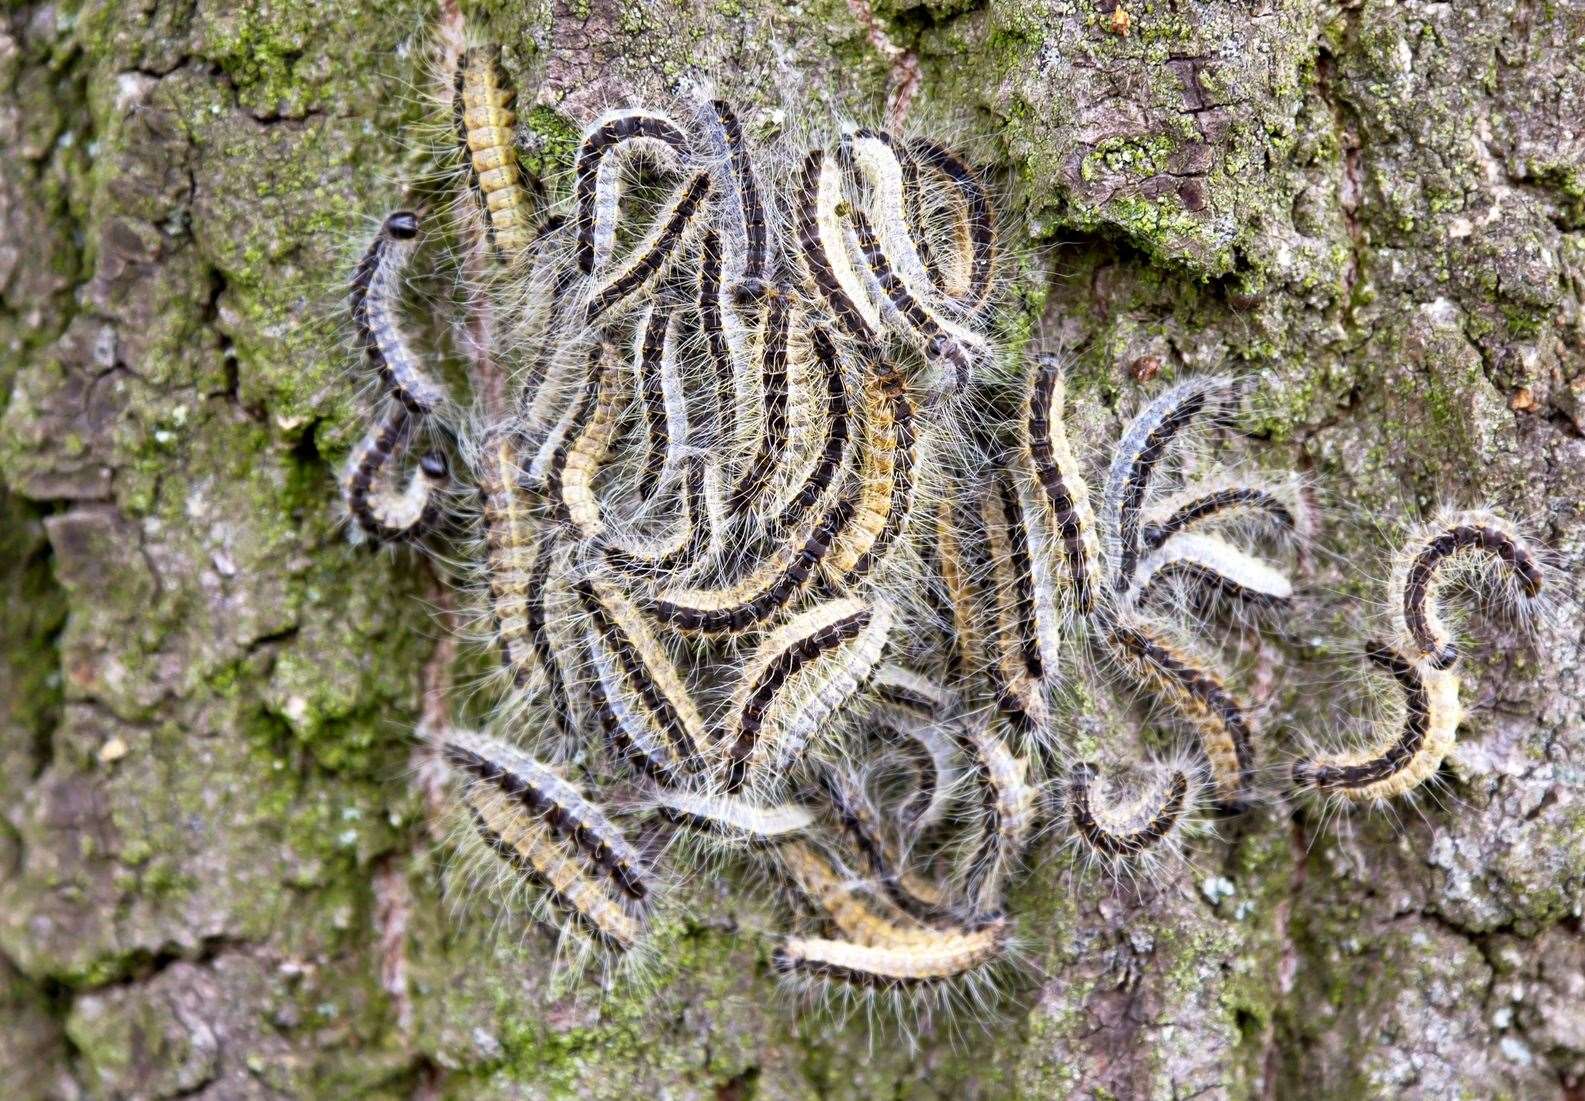 The caterpillars emerge between May and July before turning into adult moths